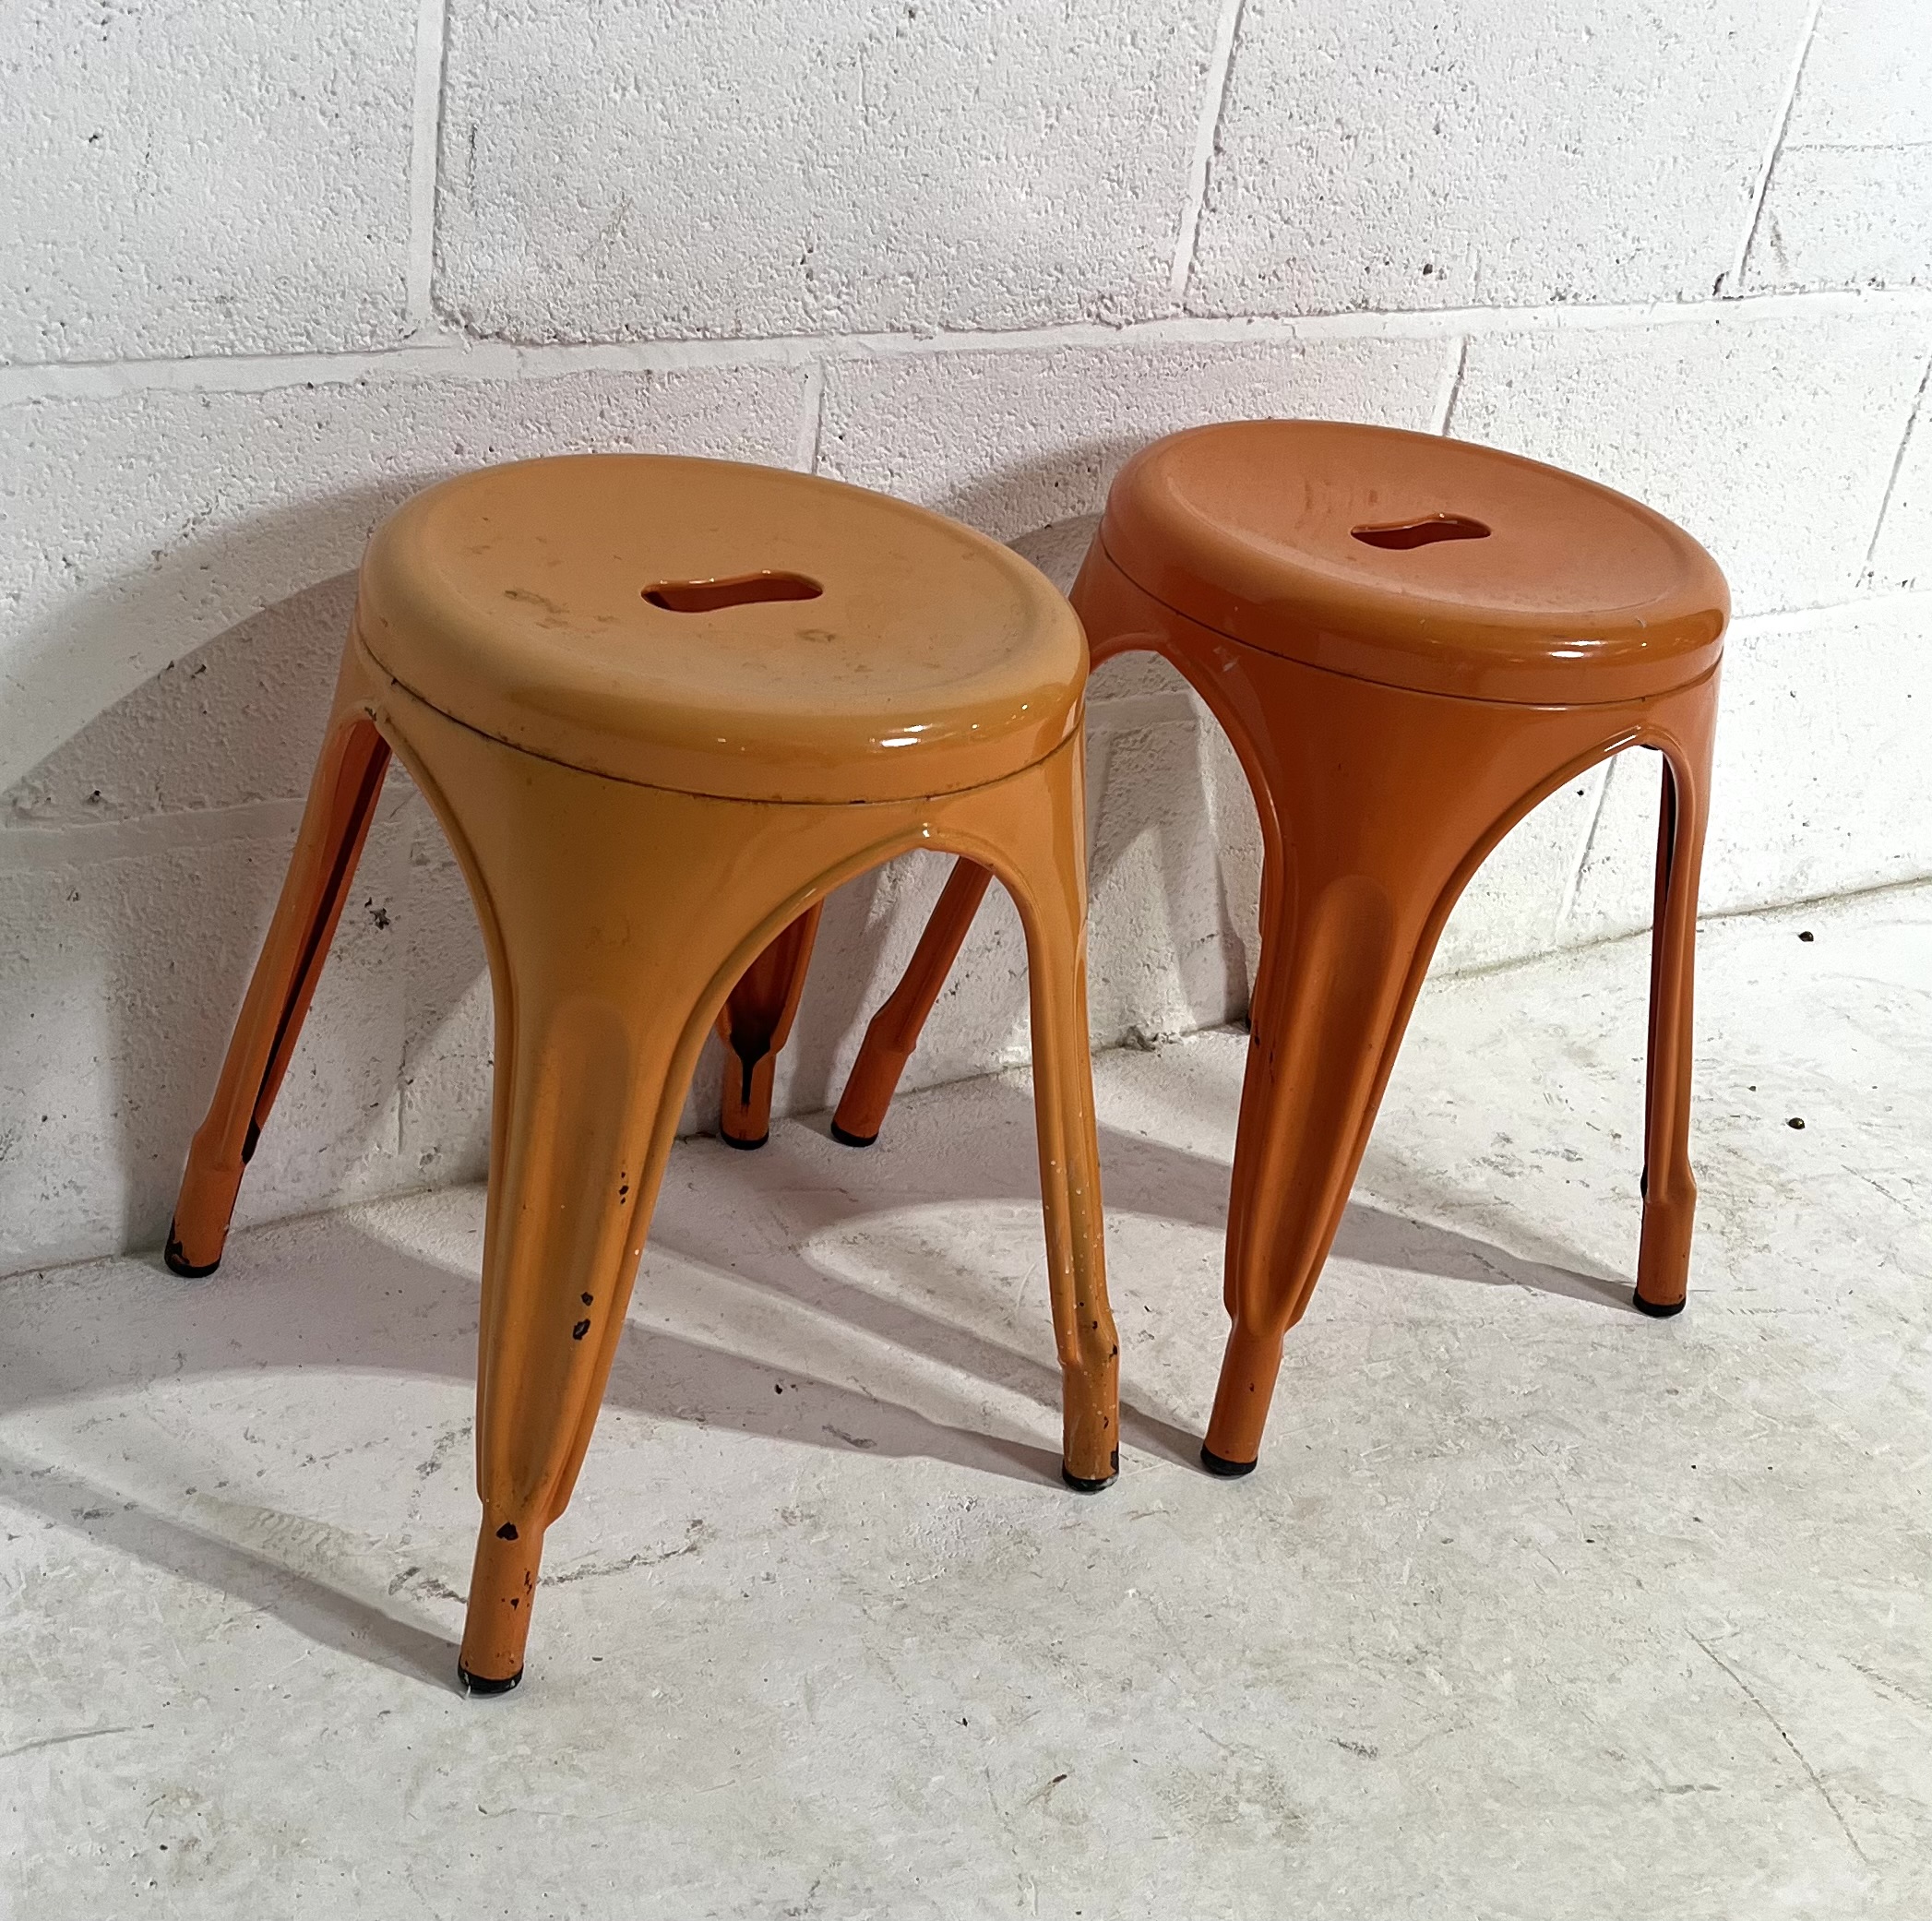 A near pair of retro style bistro metal stools, height 45cm.